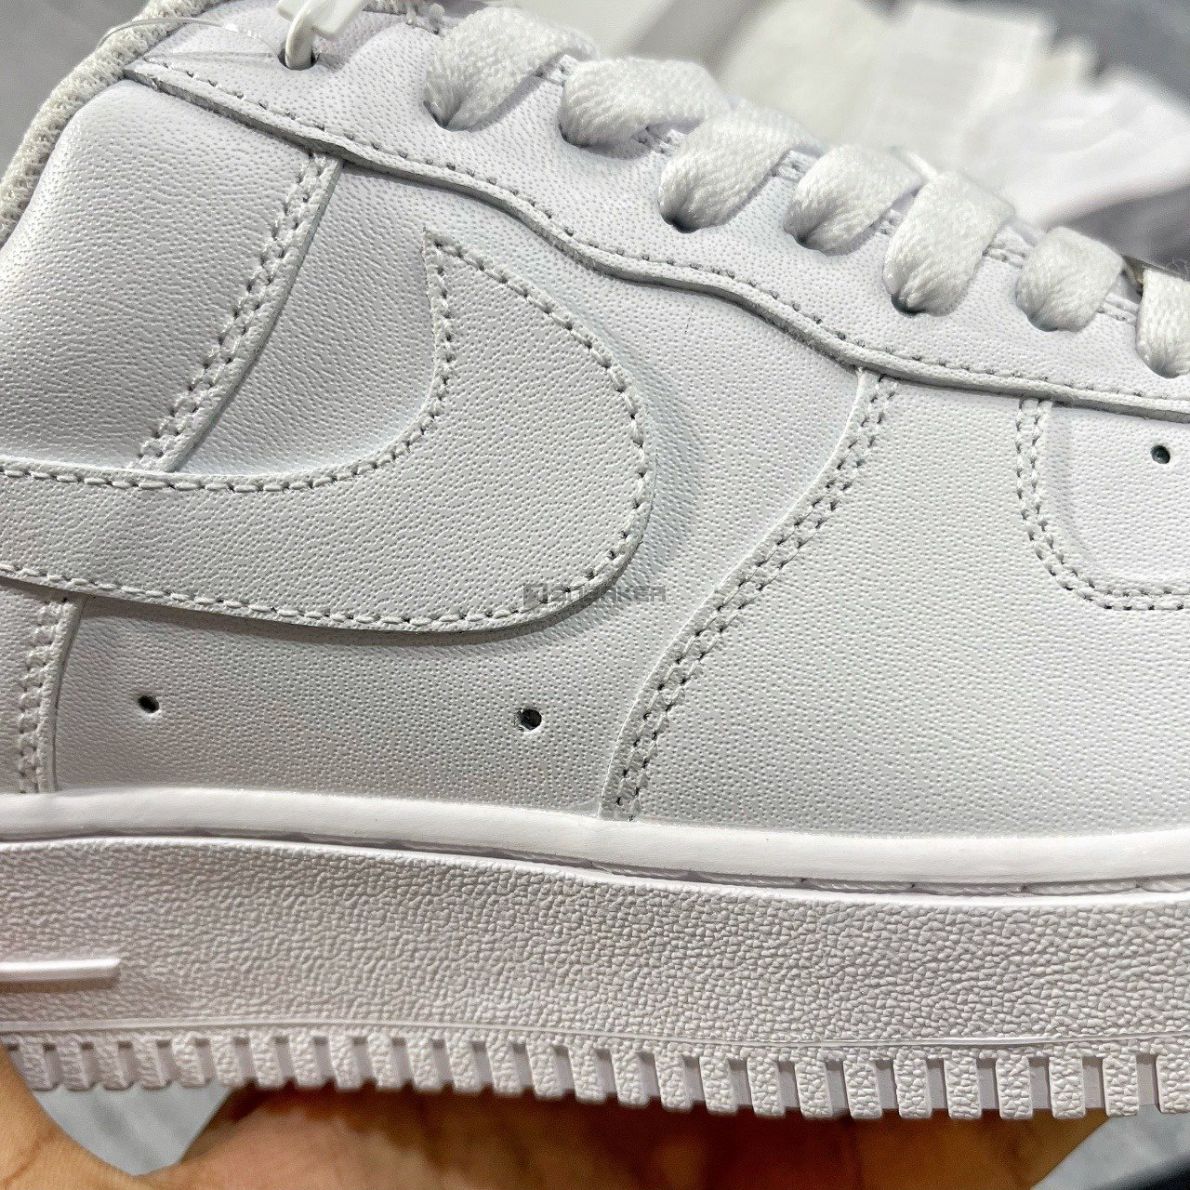 giay nike air Force 1 aF1 all white trang rep 1 1 5